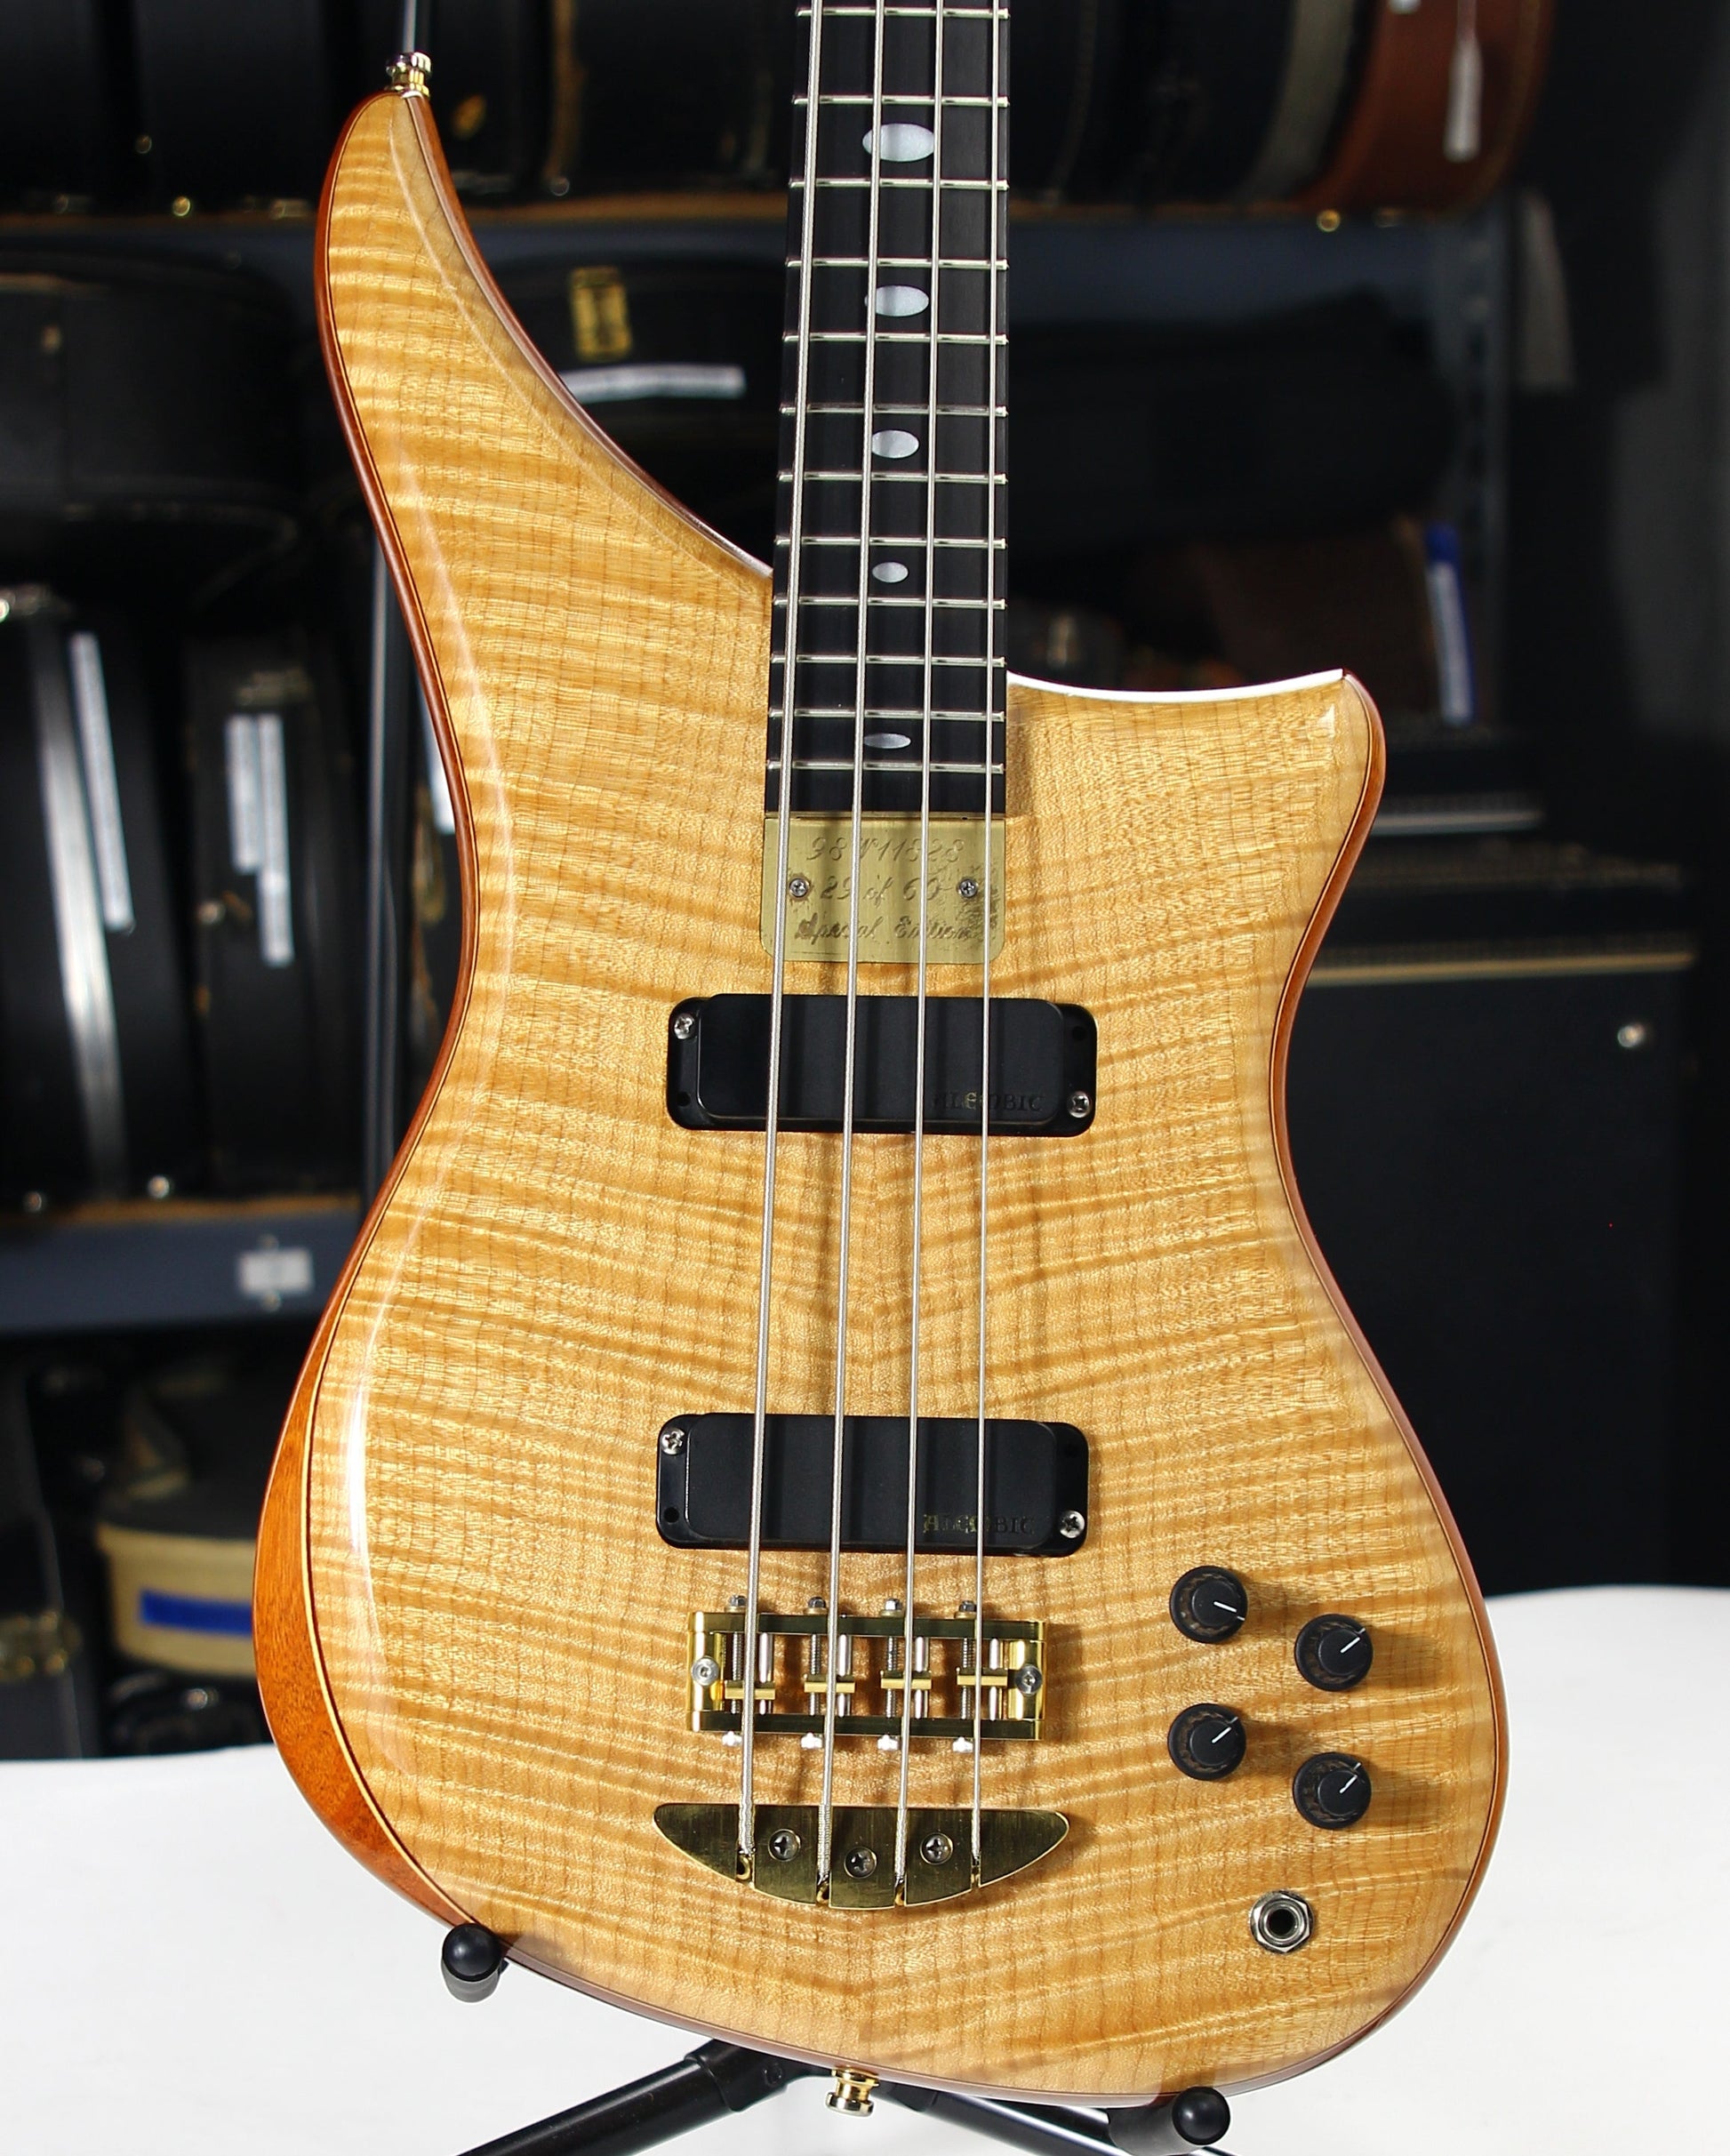 1998 Alembic Epic Special Limited Edition 4-String Bass - Beautiful Flamed Maple